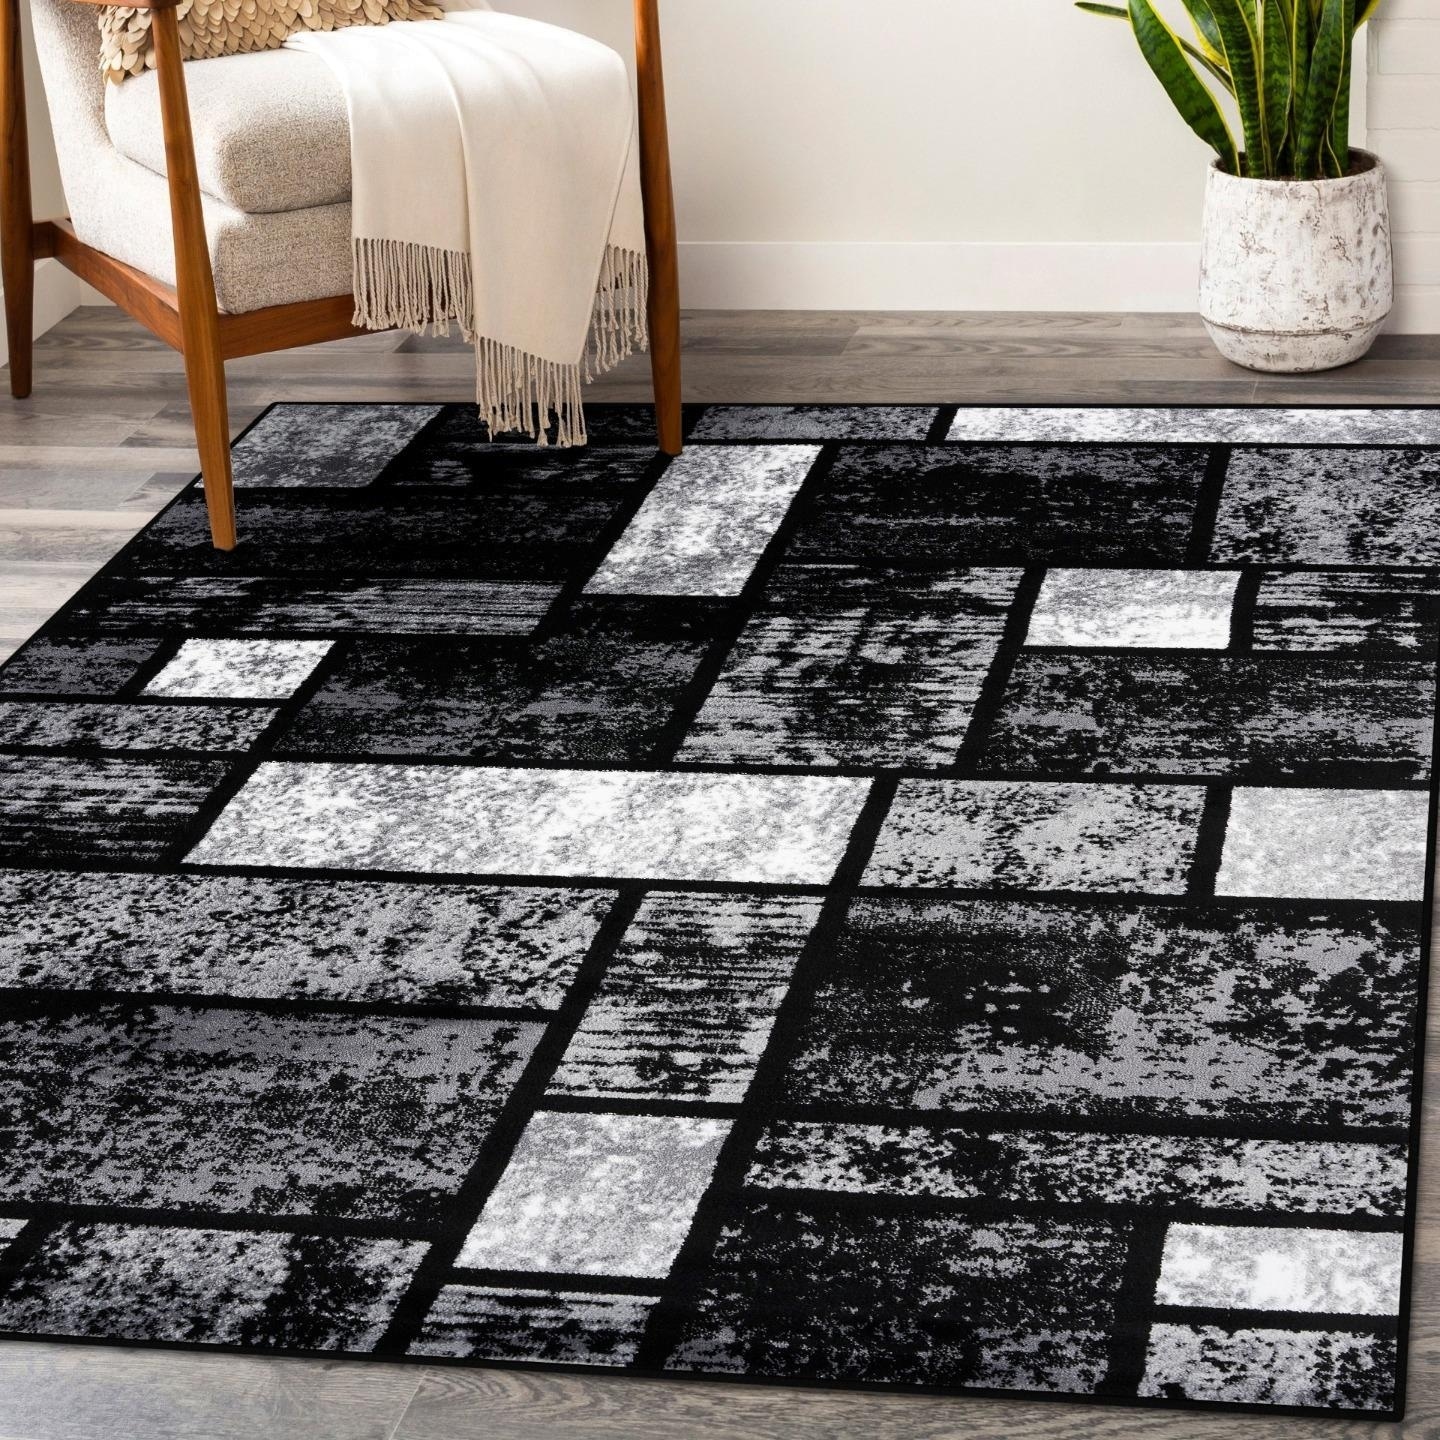 https://ak1.ostkcdn.com/images/products/is/images/direct/65baabd18810034ee9977642a2e16f6f46ccd03a/Luxe-Weavers-Geometric-Squares-Modern-Area-Rug.jpg